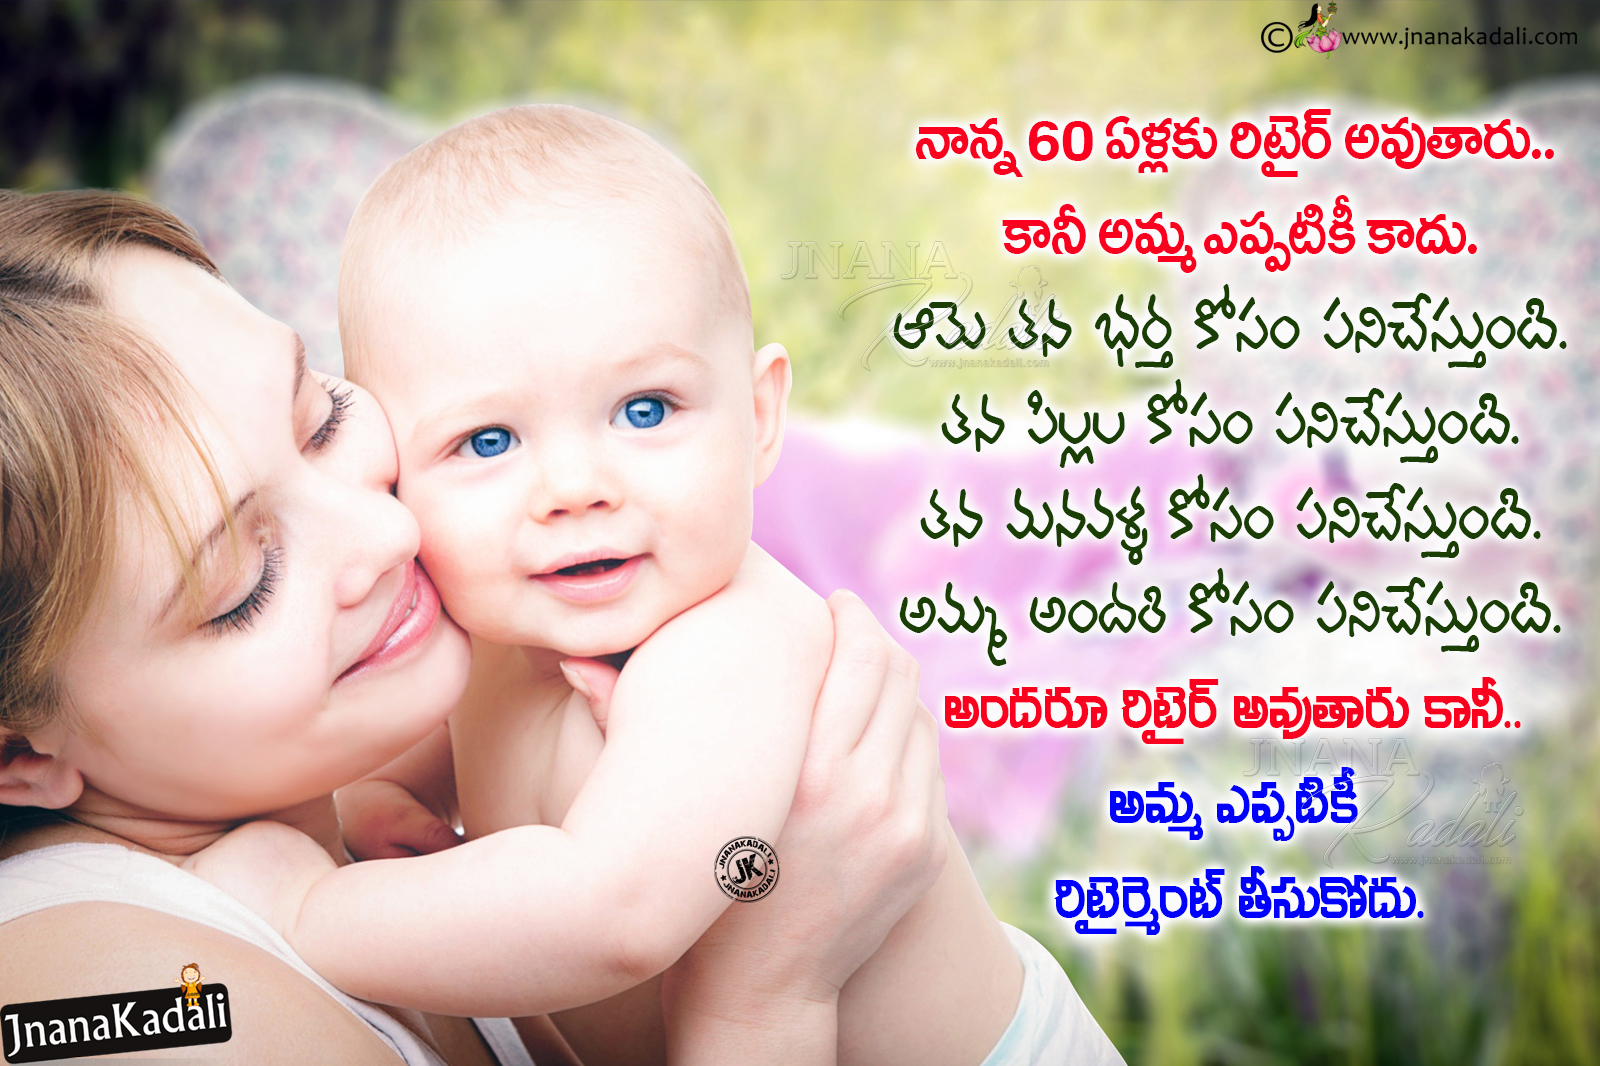 I Love You Amma Telugu Mother Quotes With Hd Wallpapers Jnana